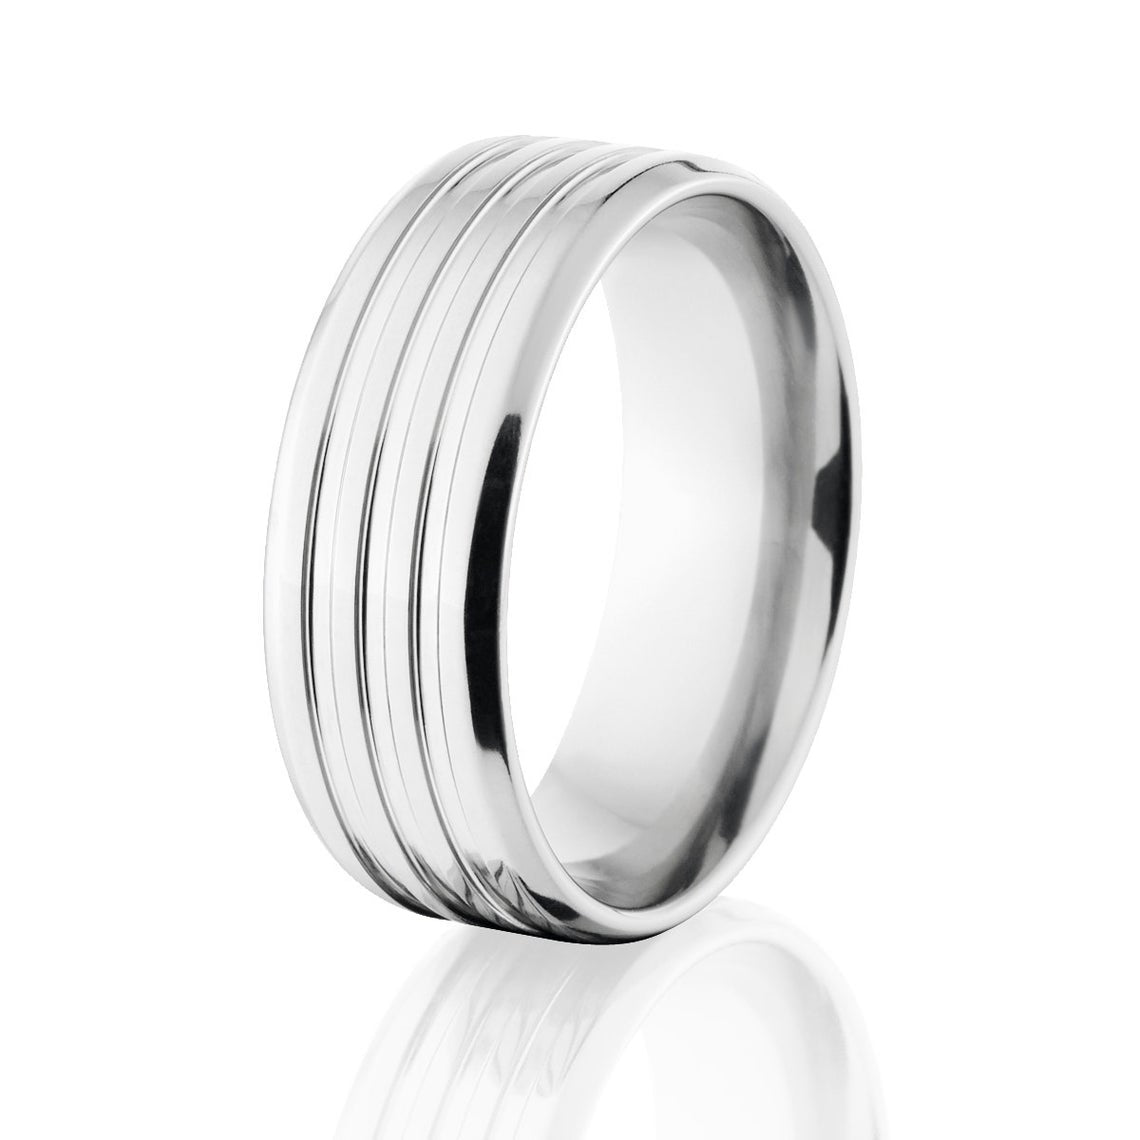 8mm wide cobalt wedding band with a triple groove